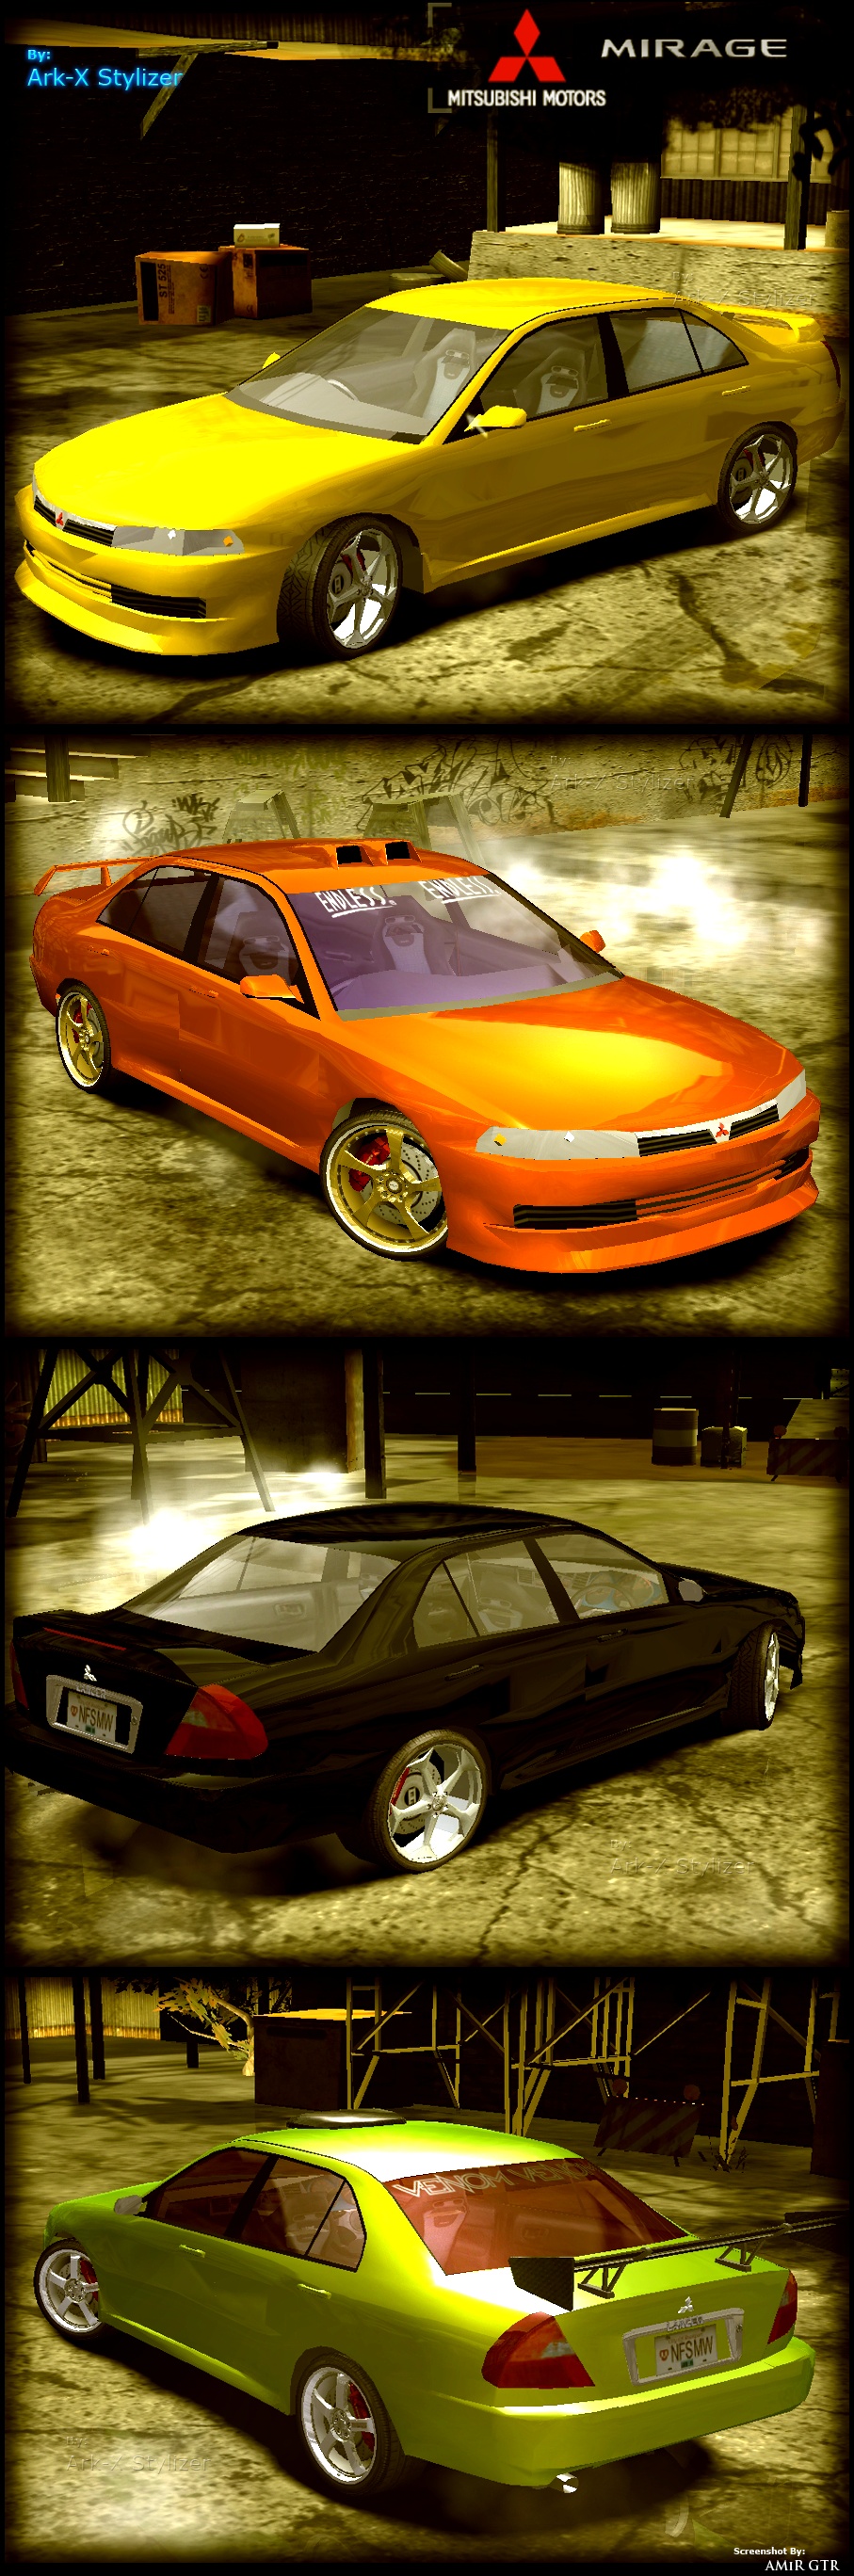 Need For Speed Most Wanted Mitsubishi Lancer (Mirage)